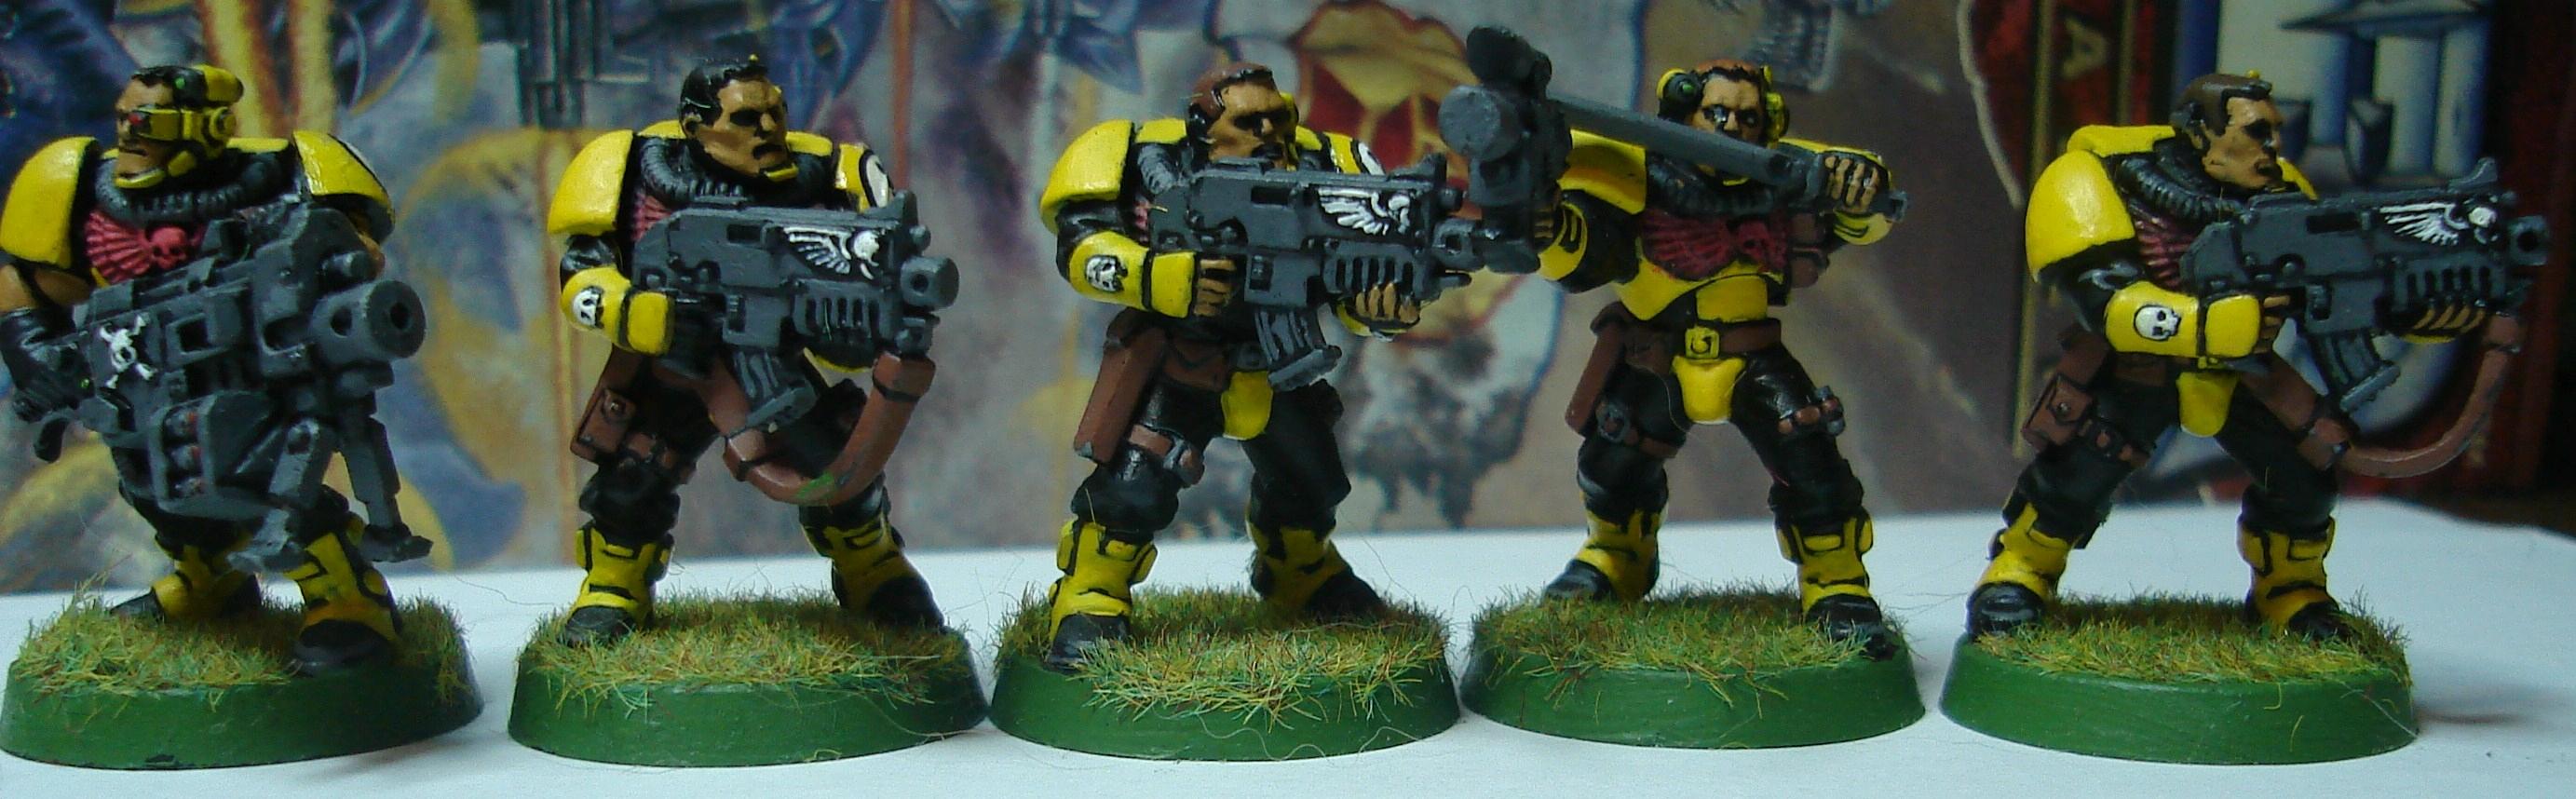 Imperial Fists, Scouts, Space Marines